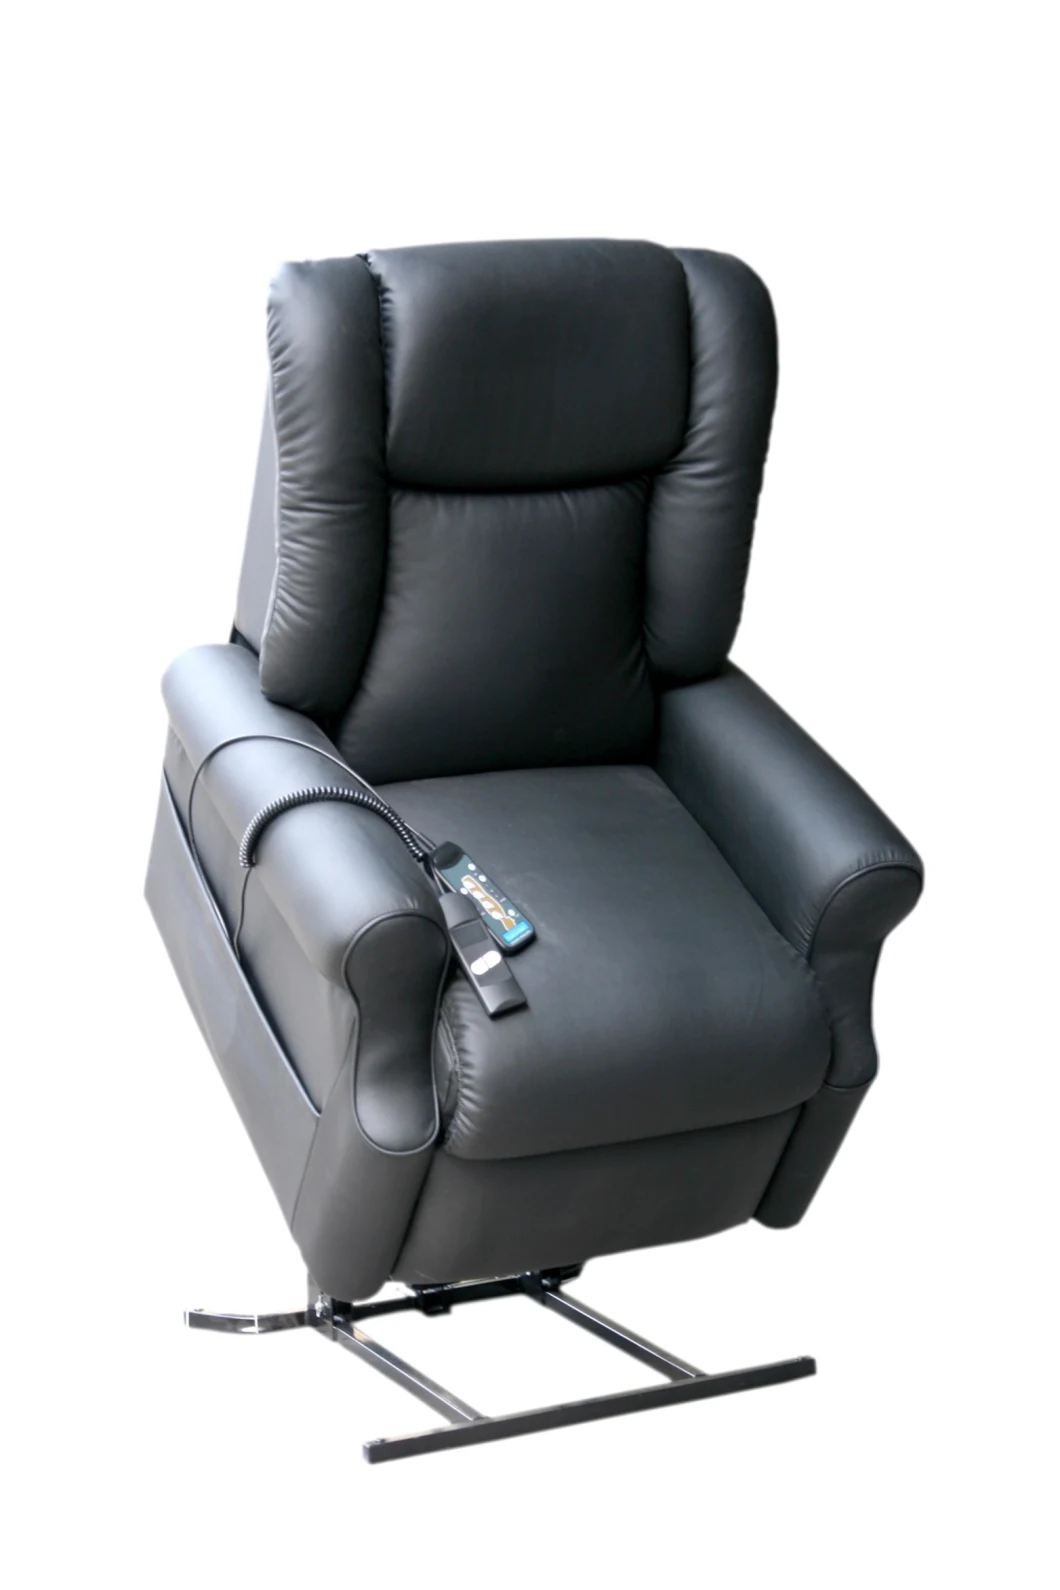 Heat Power Electric Air Leather Microfiber Recliner Lift Massage Chair